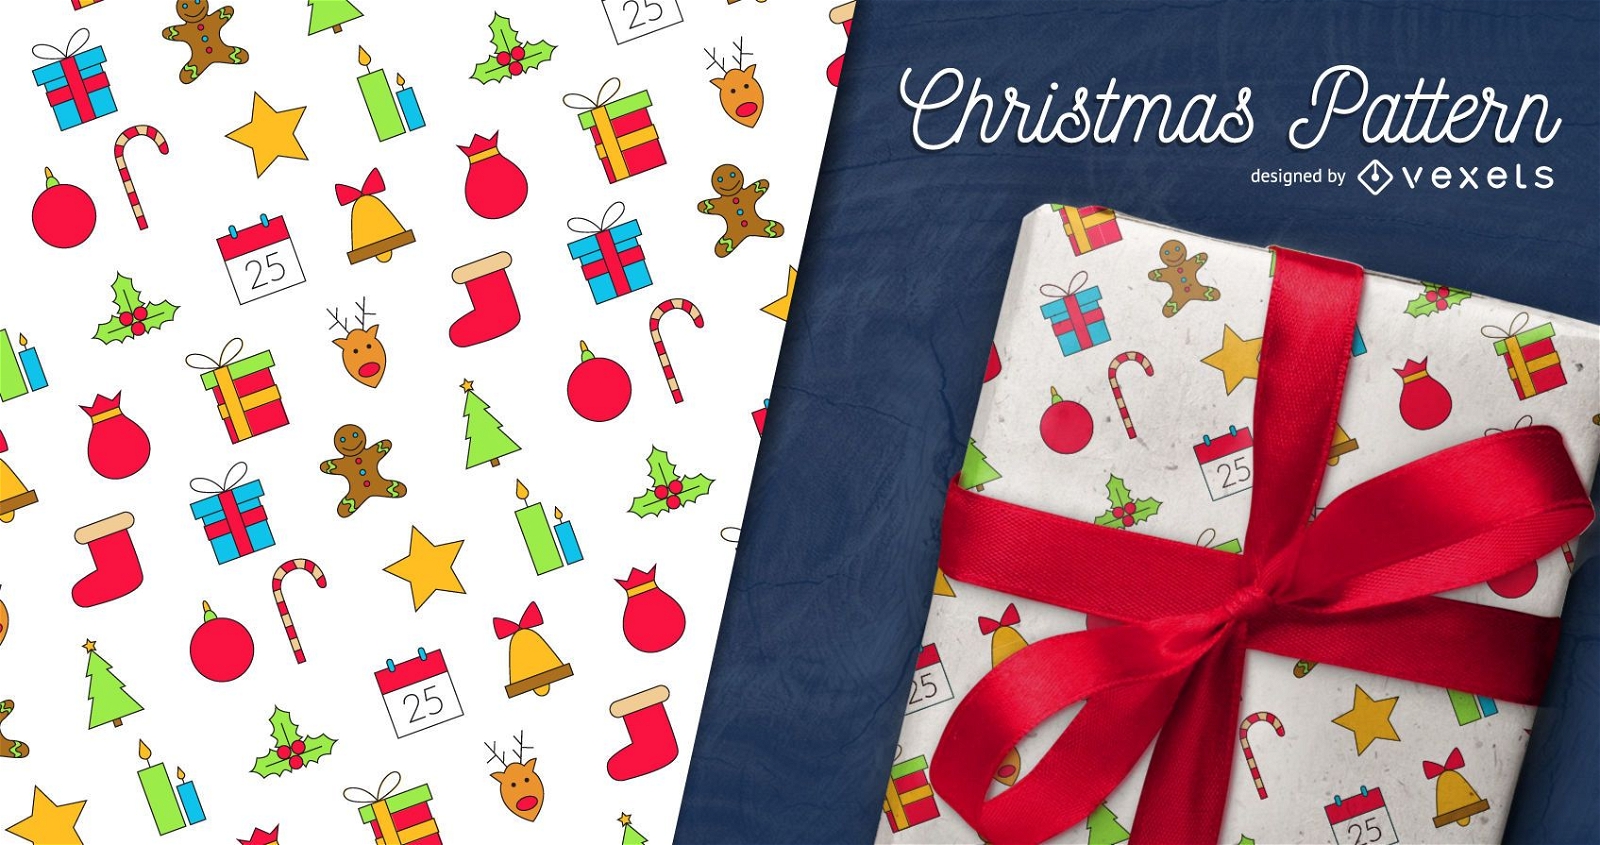 Colorful Christmas pattern with icons